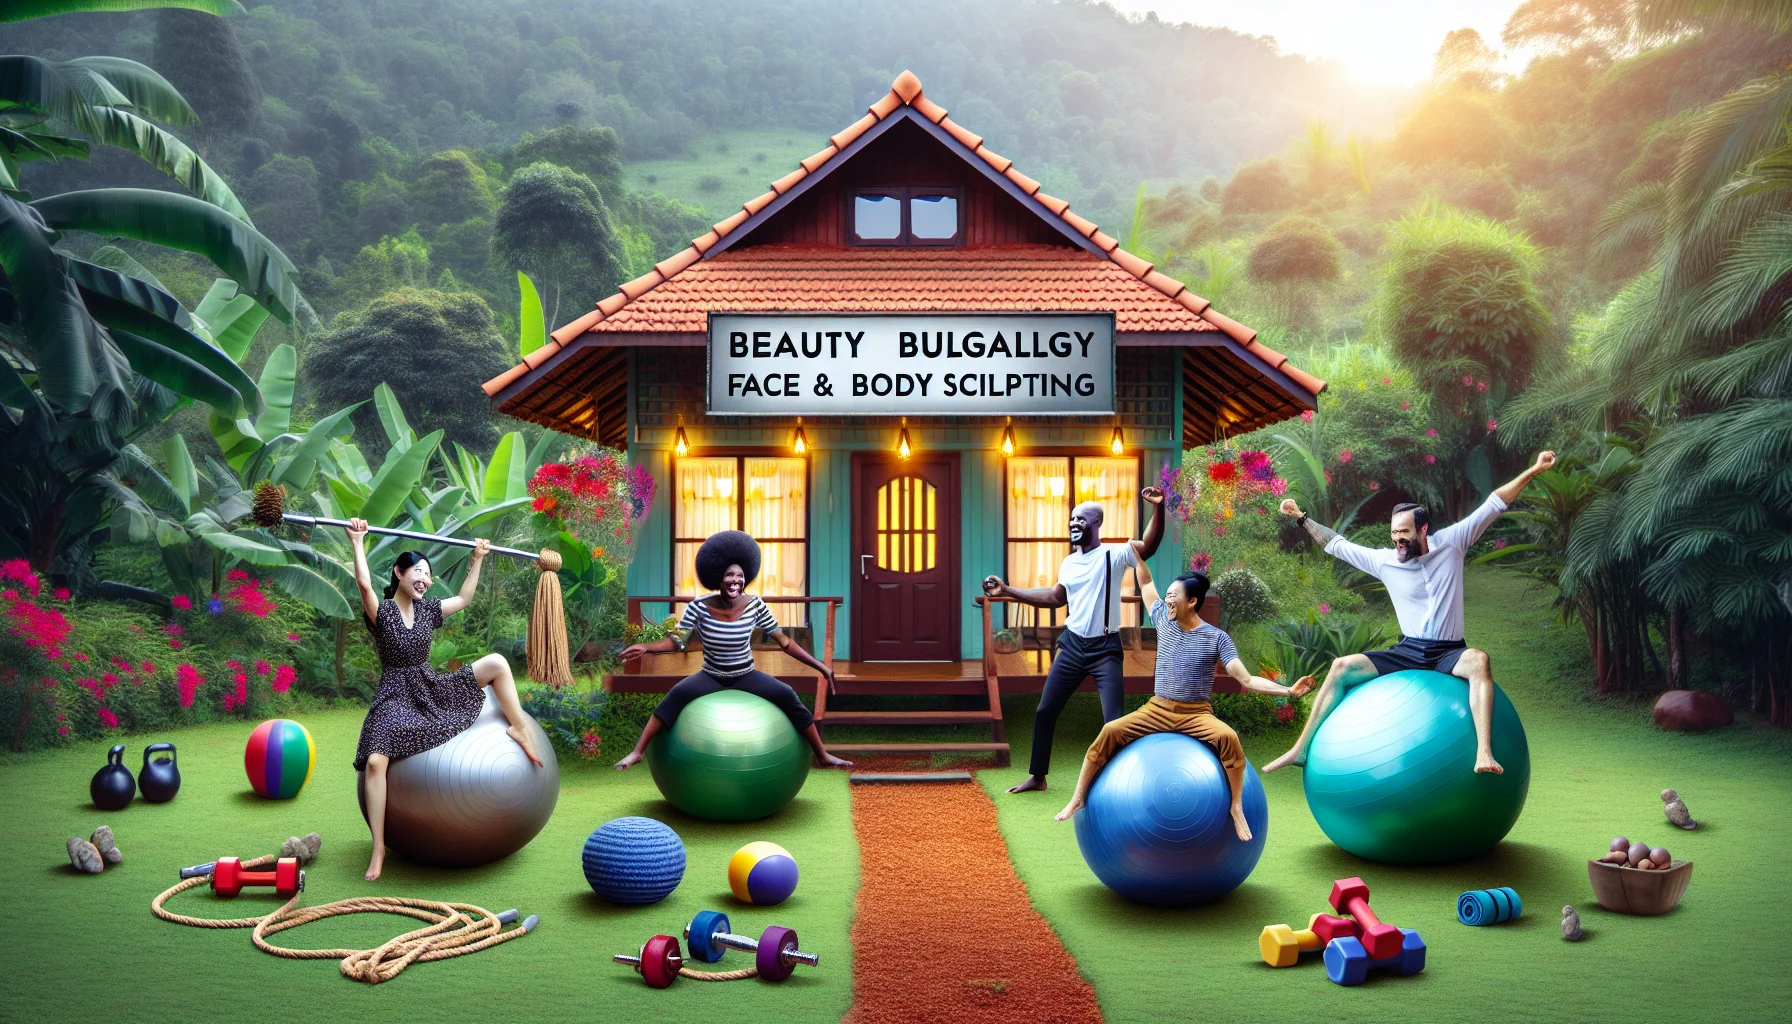 Create a whimsical and appealing image of a quaint bungalow in a tranquil environment, brightly lit. Right in front of the bungalow is a large metallic sign that reads 'Beauty Bungalow - Face & Body Sculpting'. A diverse group (an Asian woman, a Black man, a Caucasian couple) is humorously trying to balance on inflated exercise balls, obviously challenging, yet they are laughing and having a good time. Placed randomly throughout the garden are other exercise equipment like ropes, weights, and yoga mats, showing the different forms of exercises available.